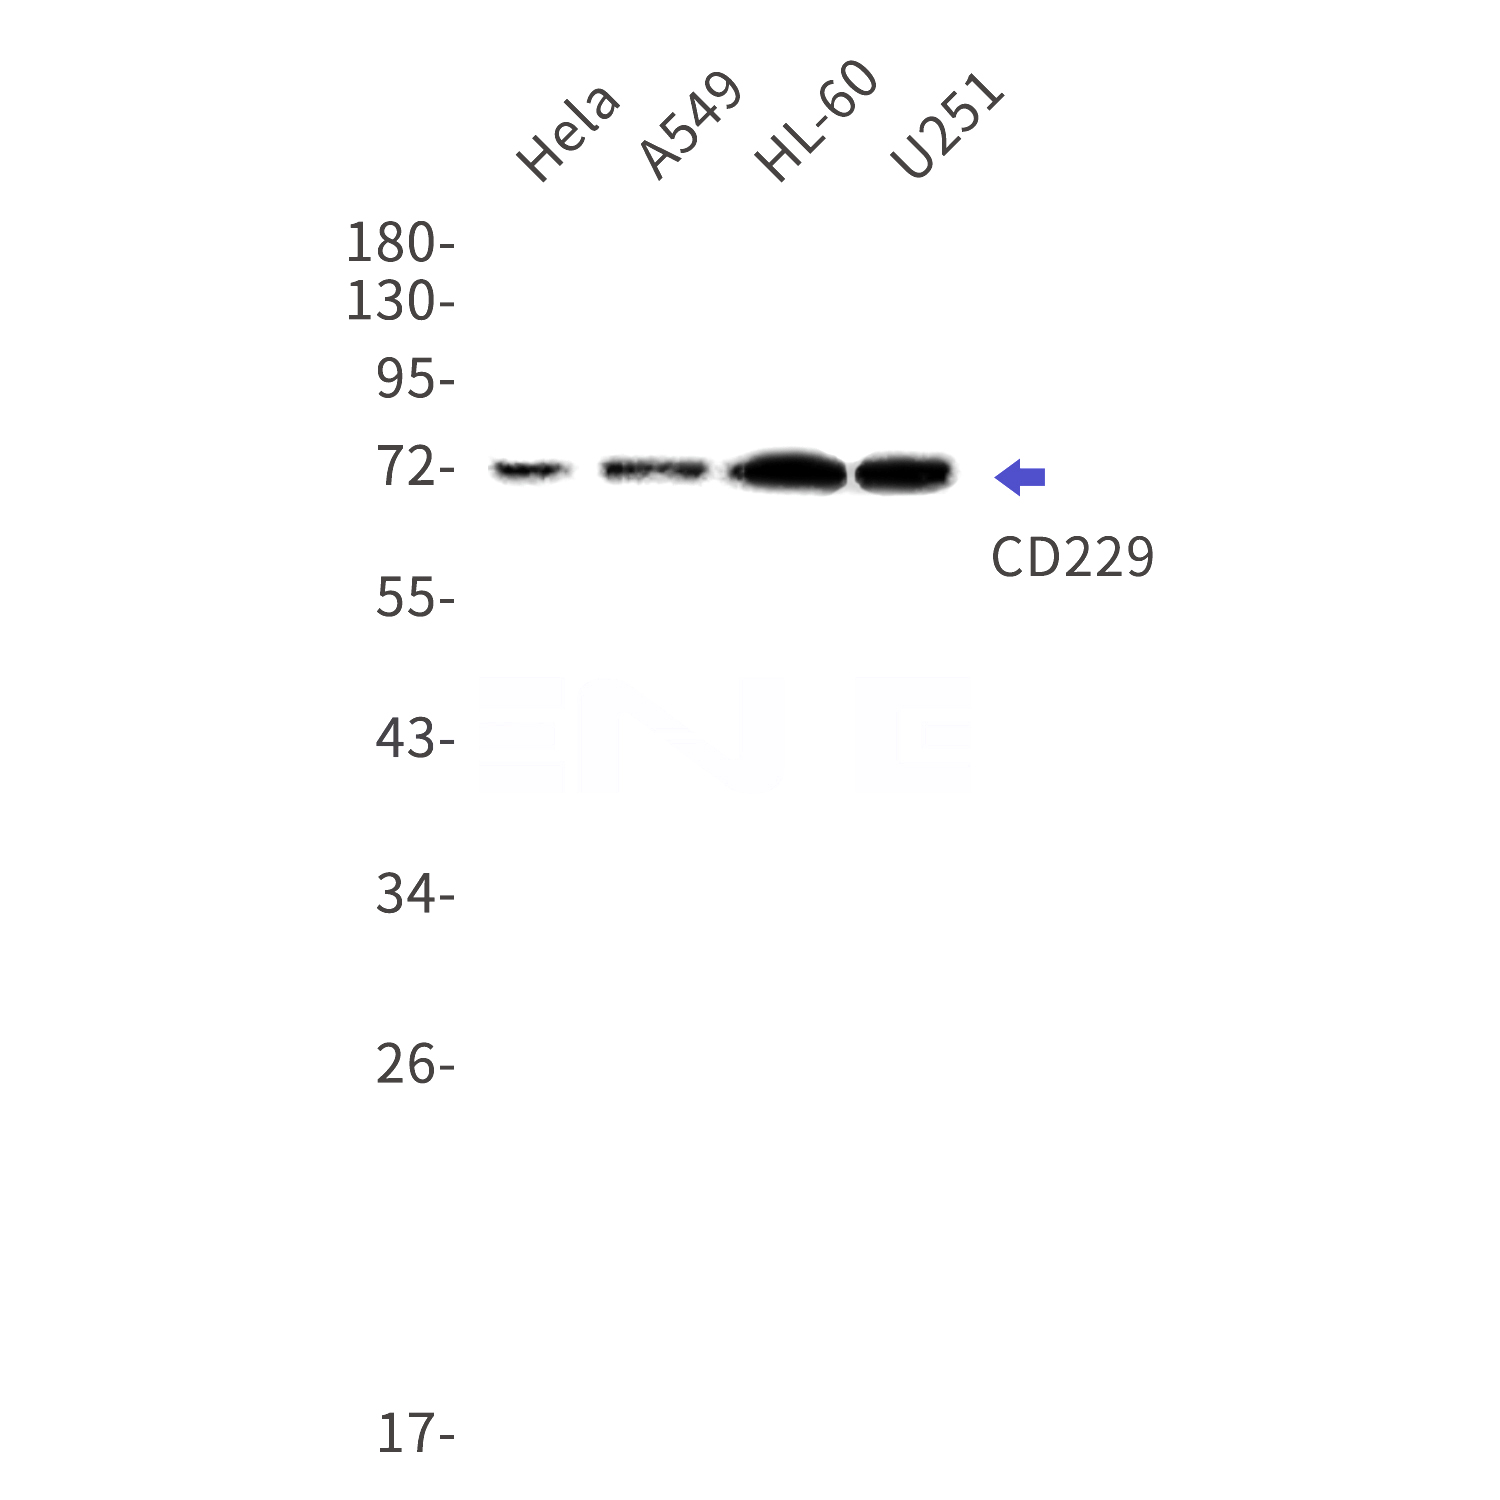 Western blot detection of CD229 in Hela,A549,HL-60,U251 cell lysates using CD229 Rabbit mAb(1:1000 diluted).Predicted band size:72kDa.Observed band size:72kDa.